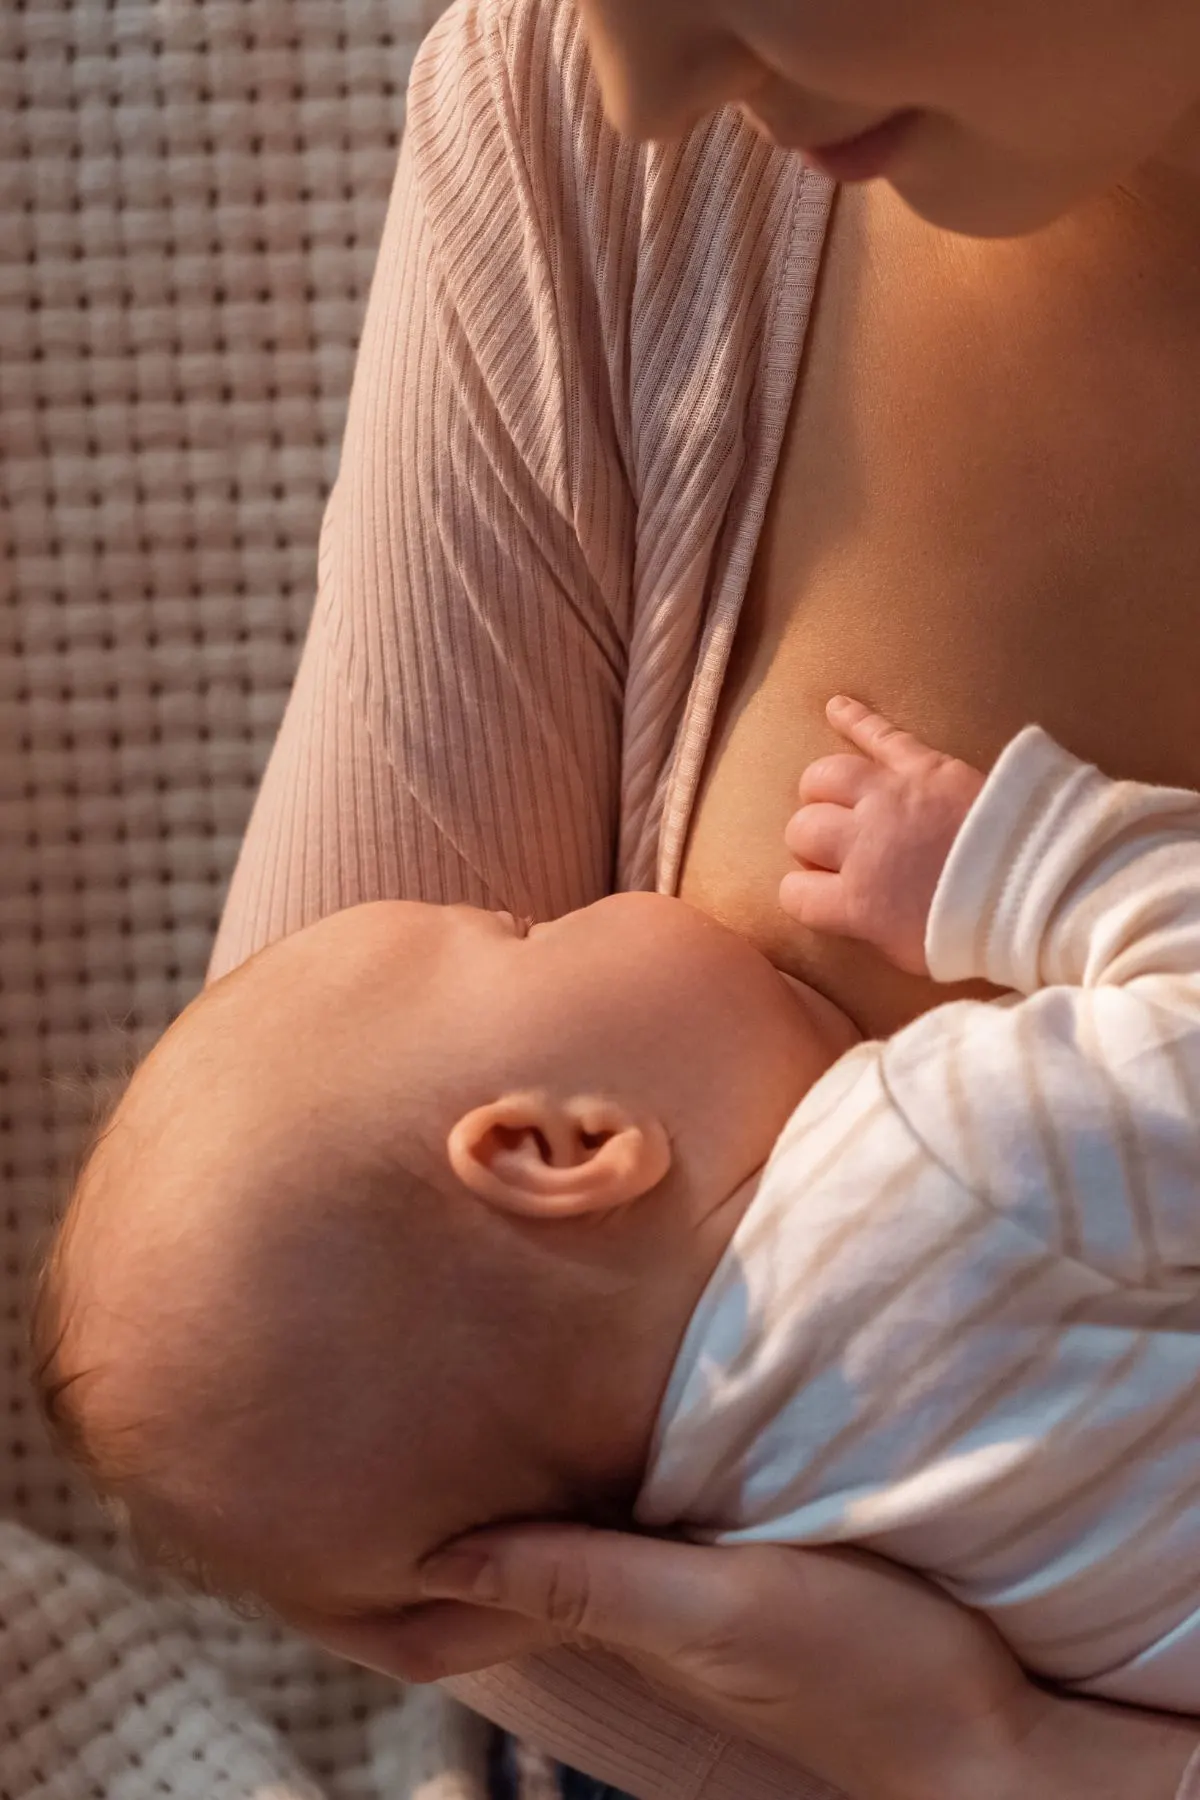 A mom in a pink cardigan breastfeeding her baby girl in a dimly lit room.